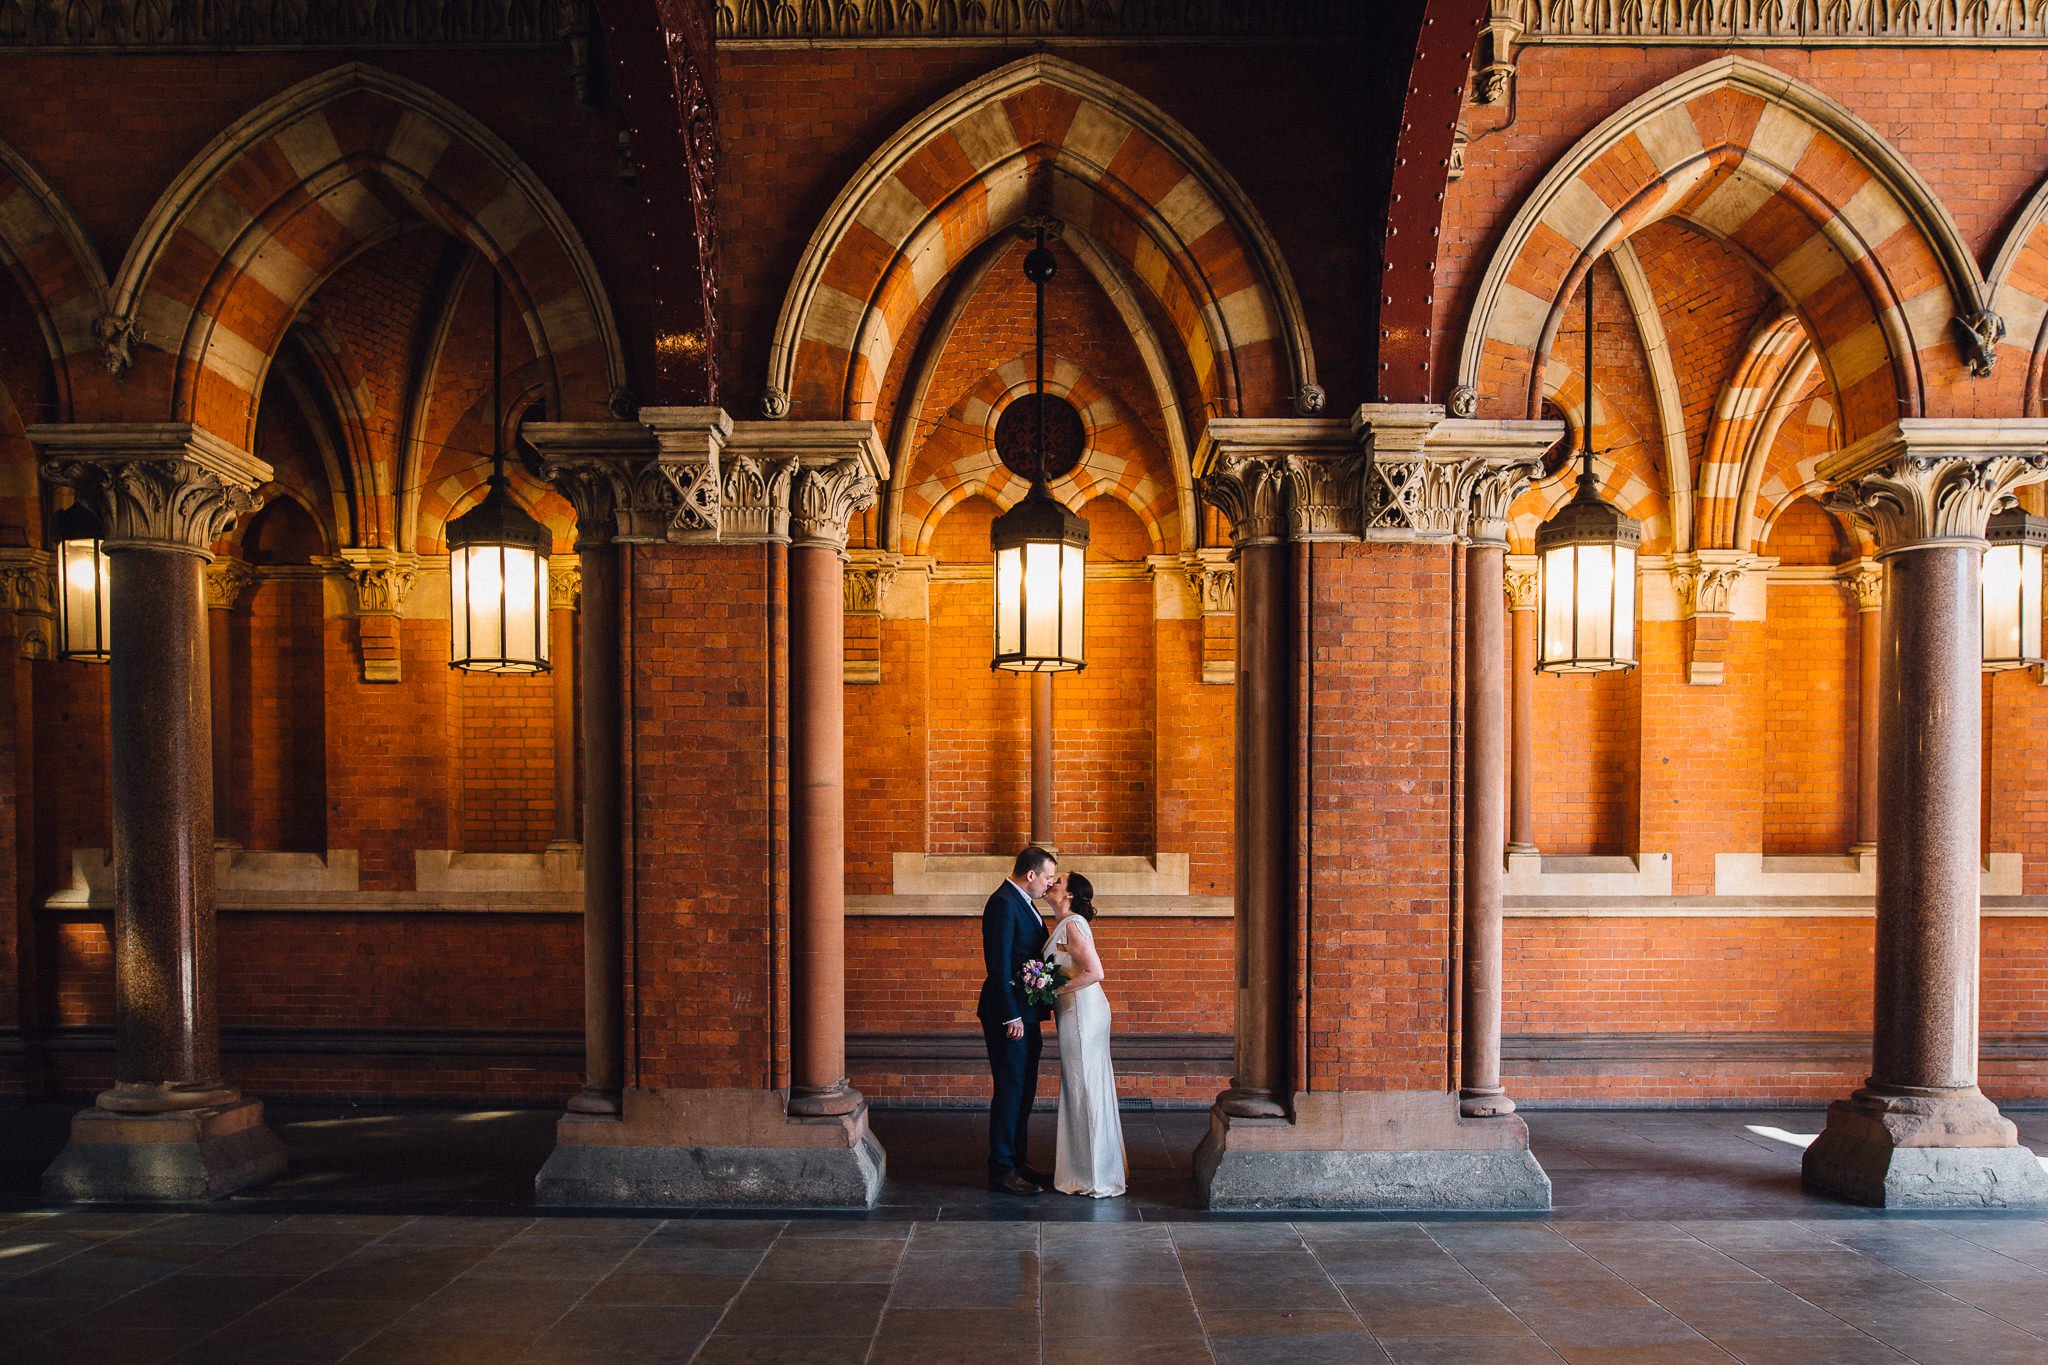  Bride and Groom kissing under an archway at St. Pancras station London 